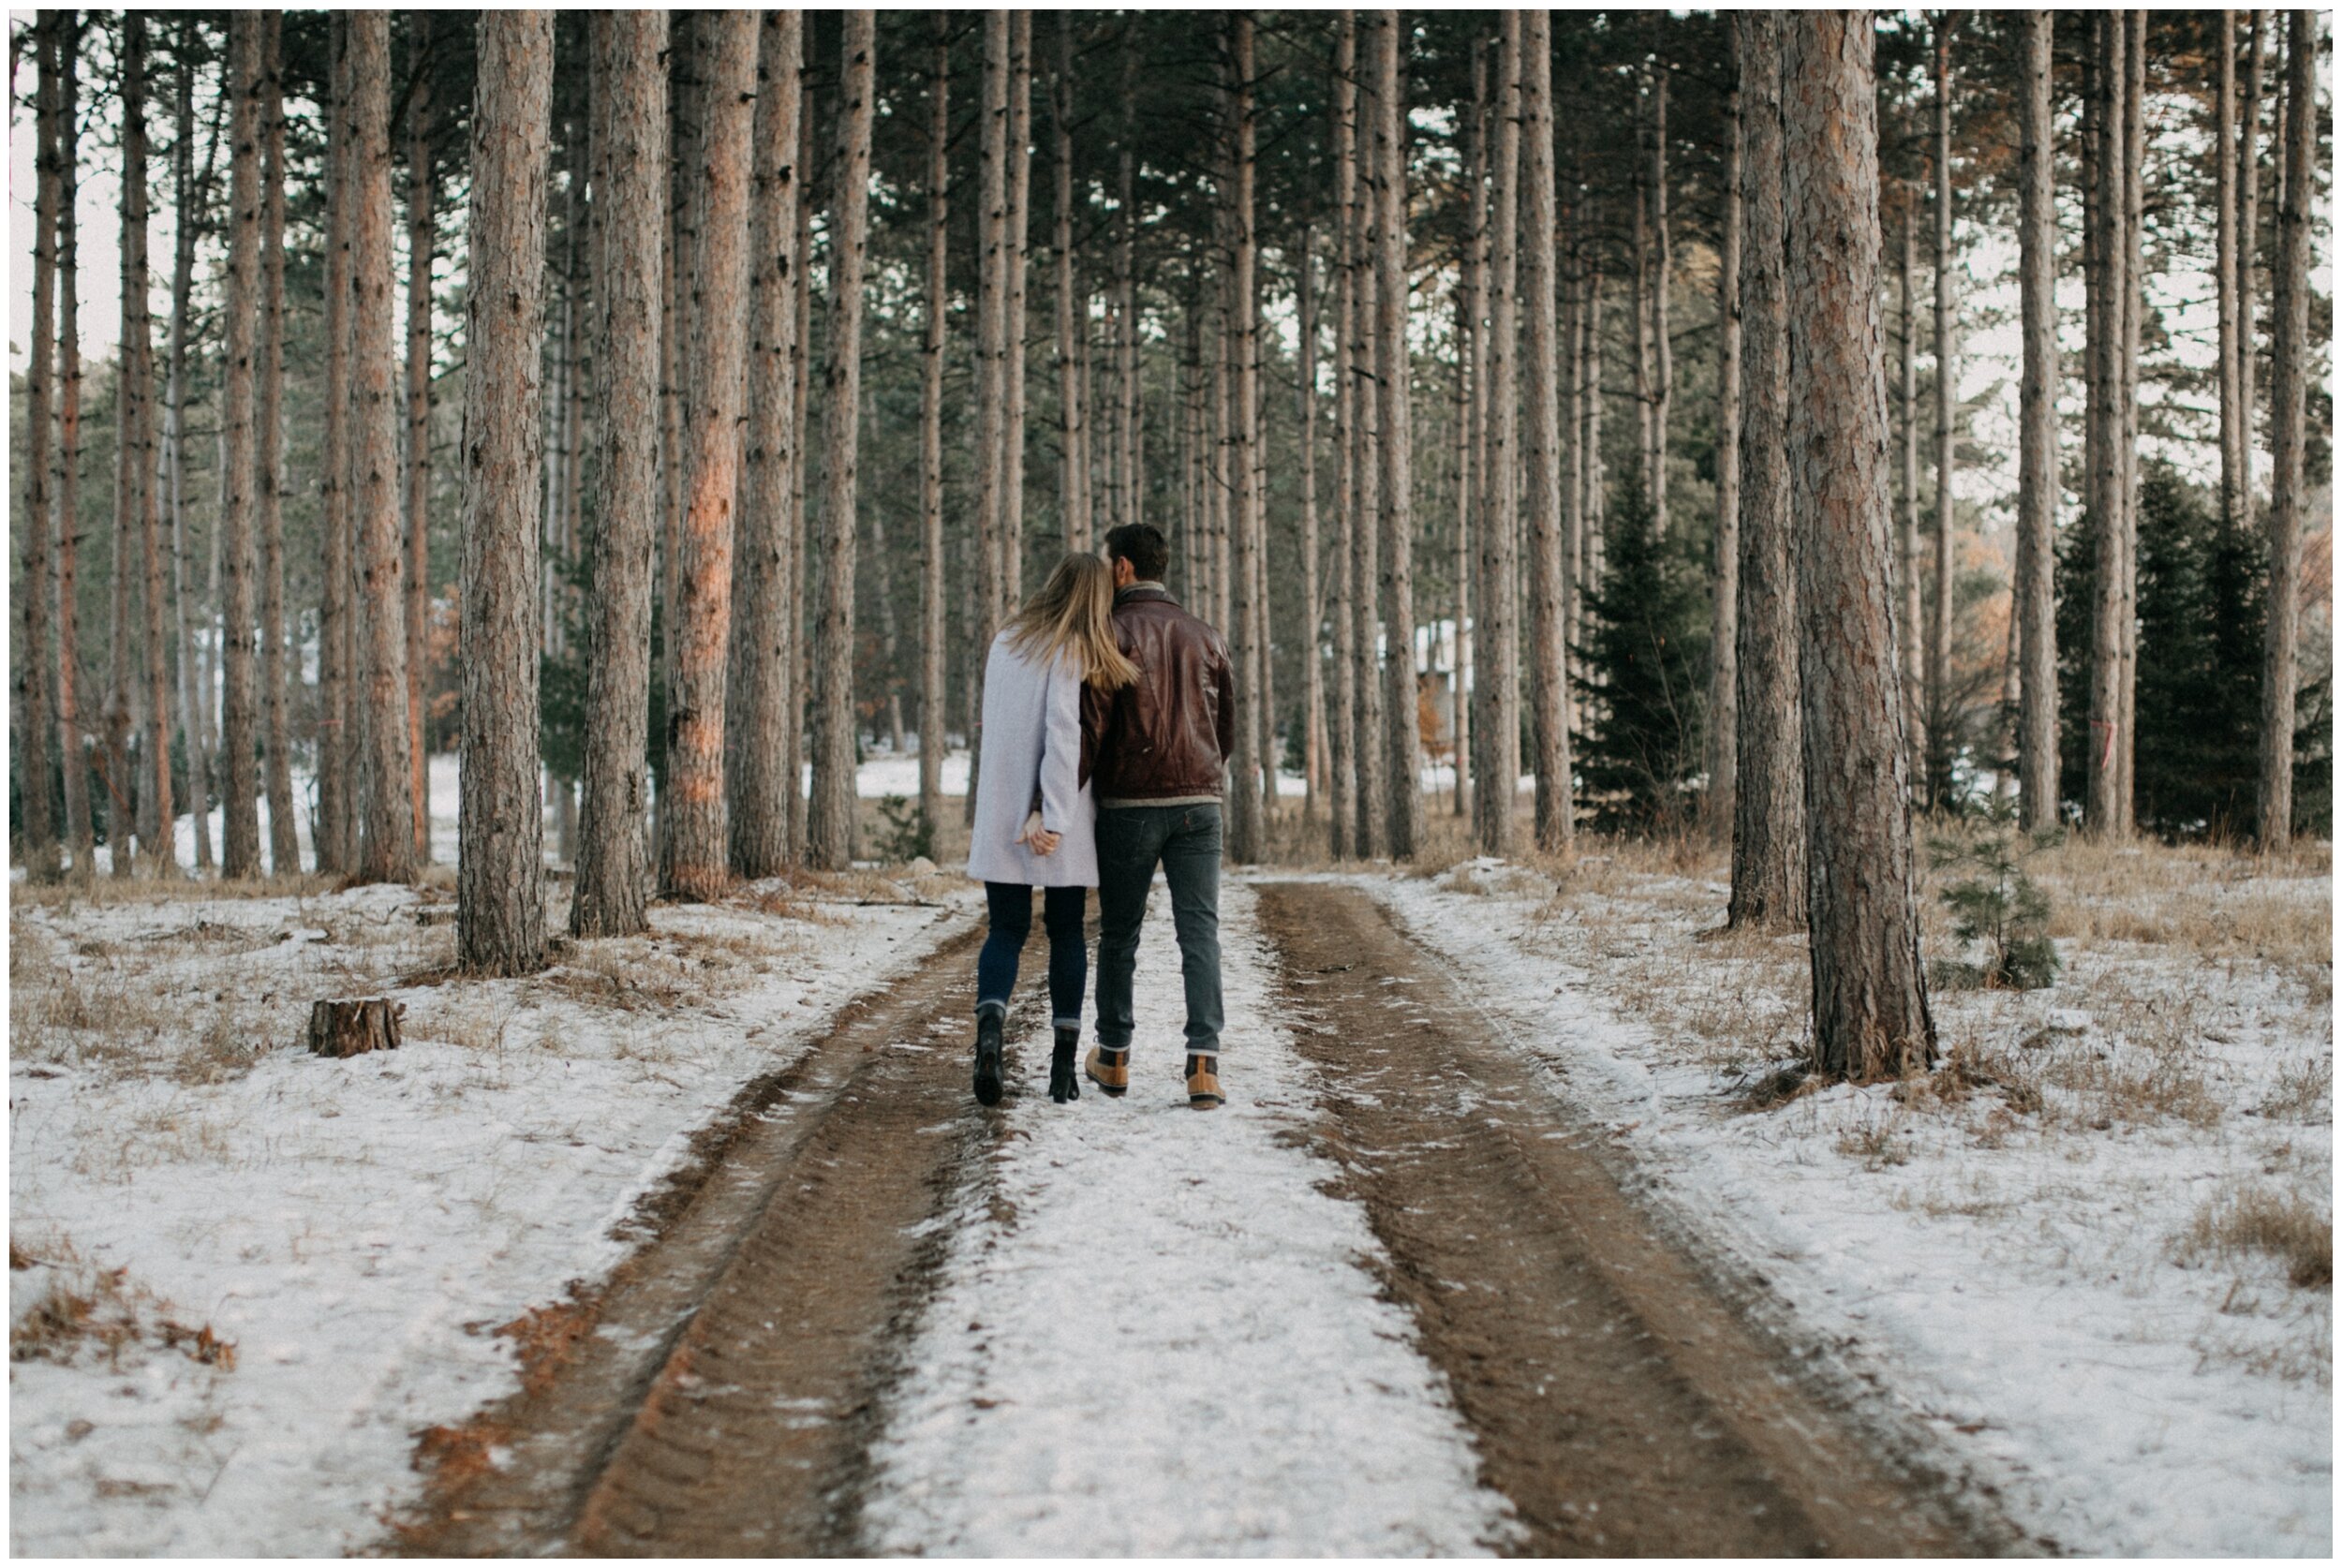 Couple walking through pine tree forest in the snow during winter at Minnesota Christmas tree farm